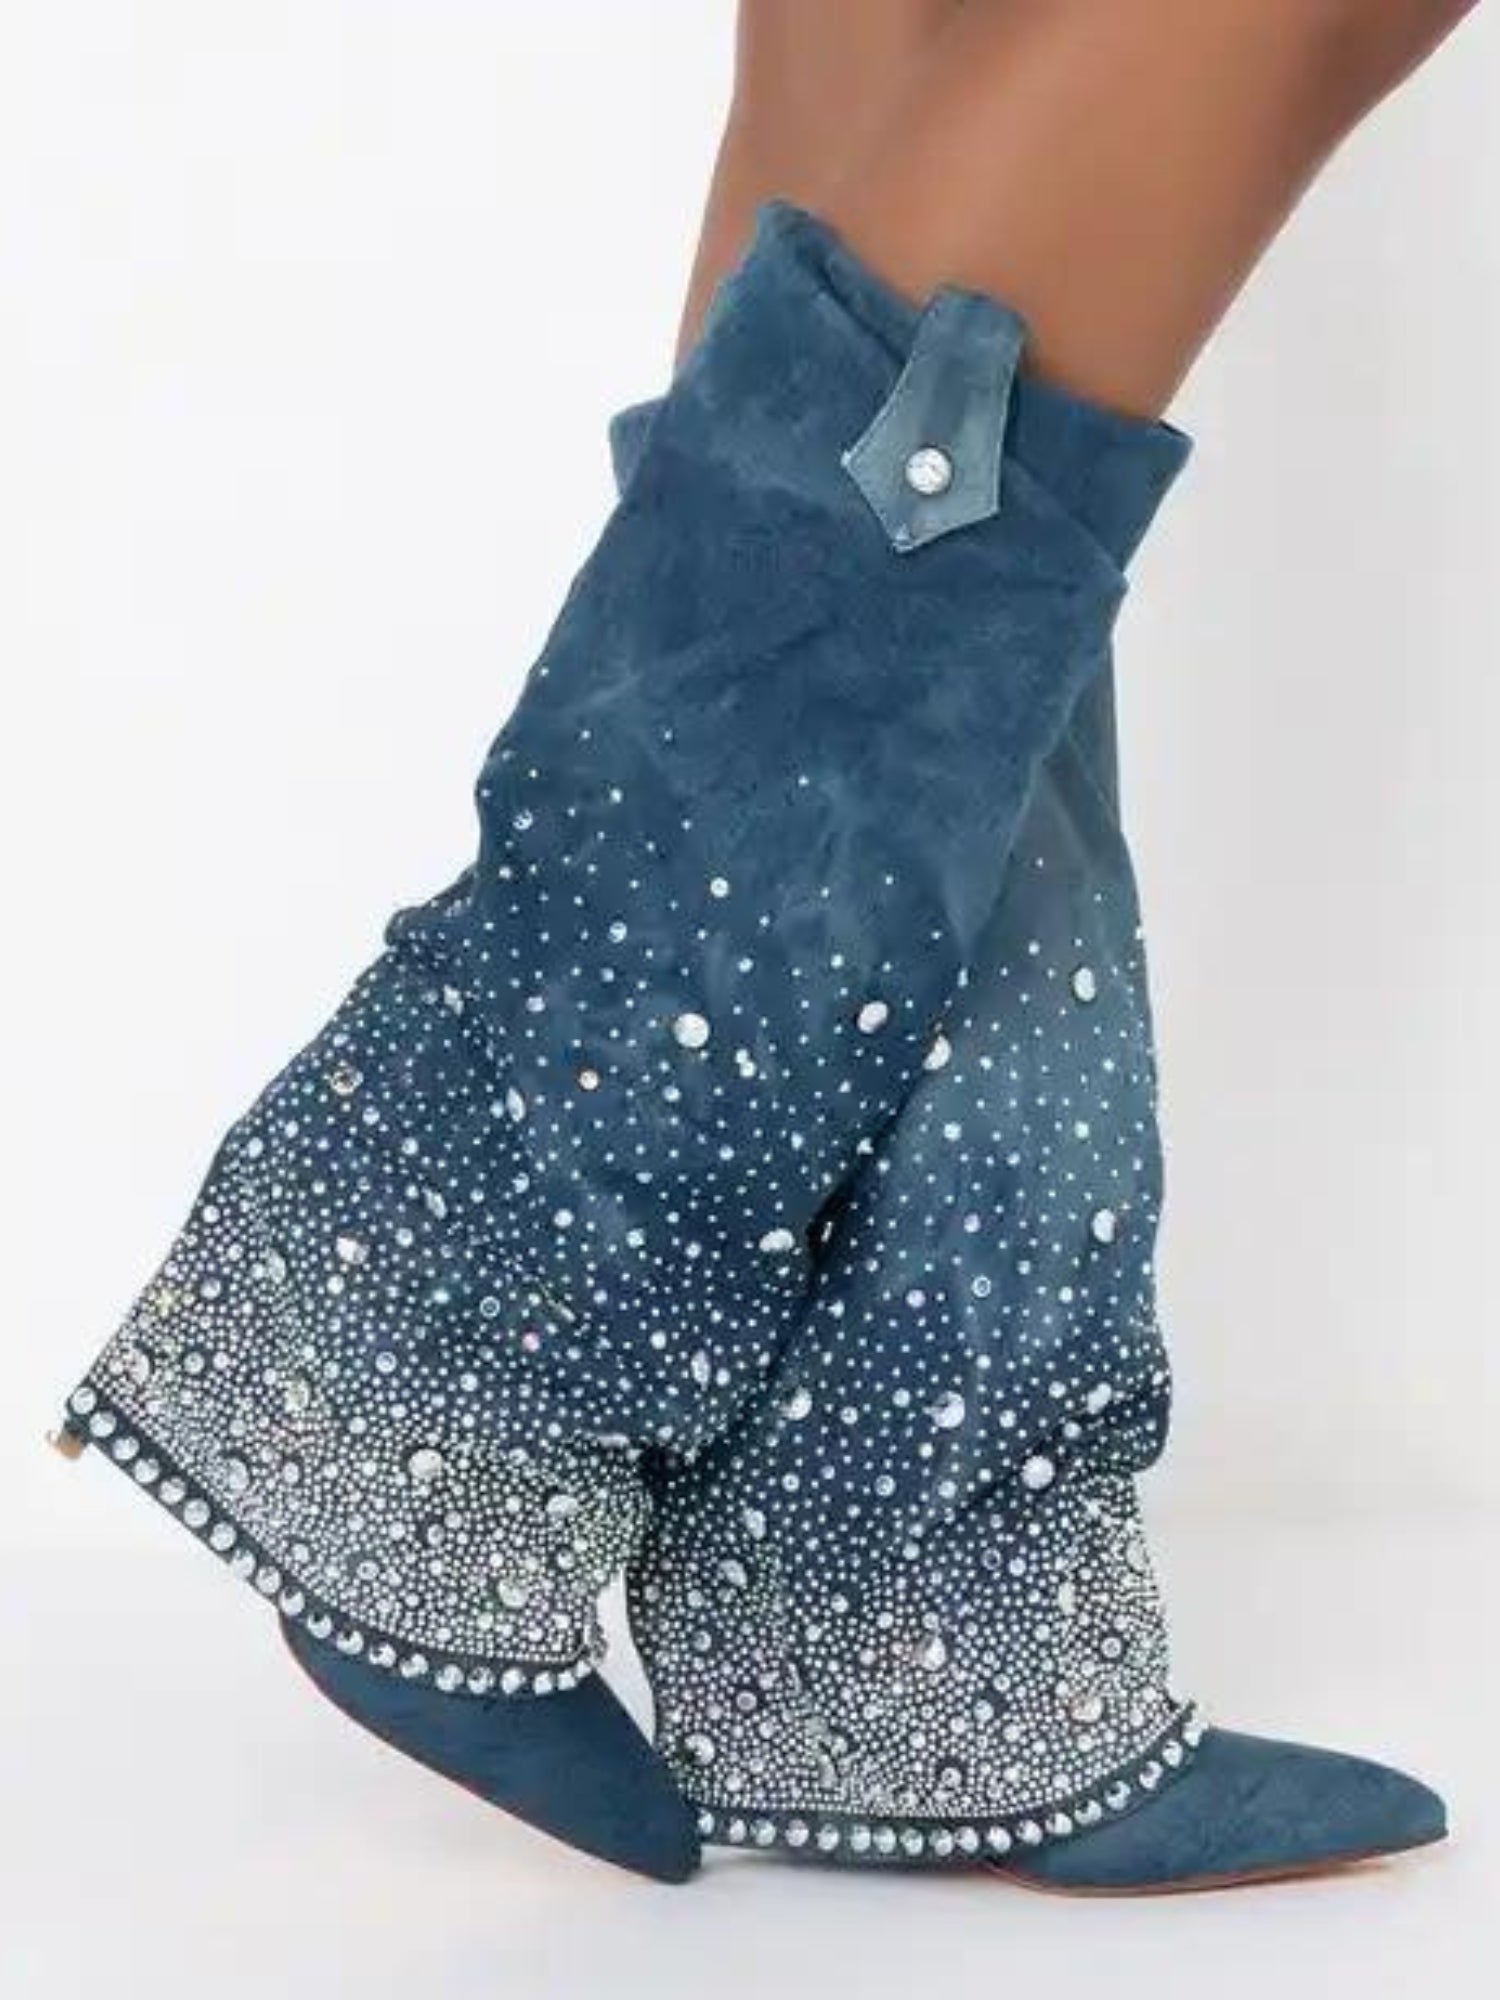 The Allo Bedazzled Denim Boots - It’s no surprise that these Azalea Wang bedazzled denim knee high boots are so breathtaking to look at. In fact, these shoes are a fashion statement in and of themselves. Durable and soft to the touch, these bedazzled boot